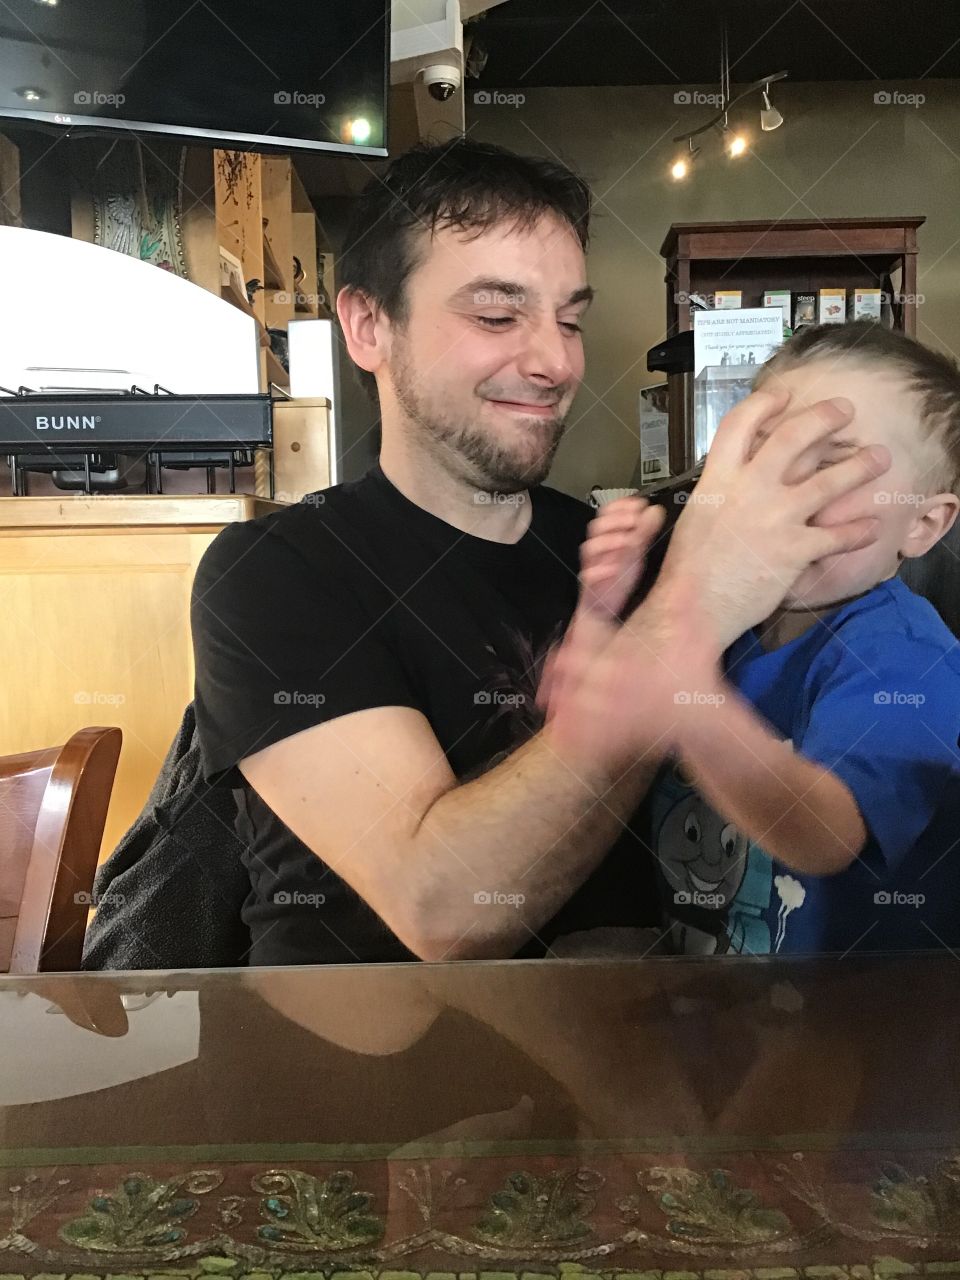 My son and a buddy goofing around 